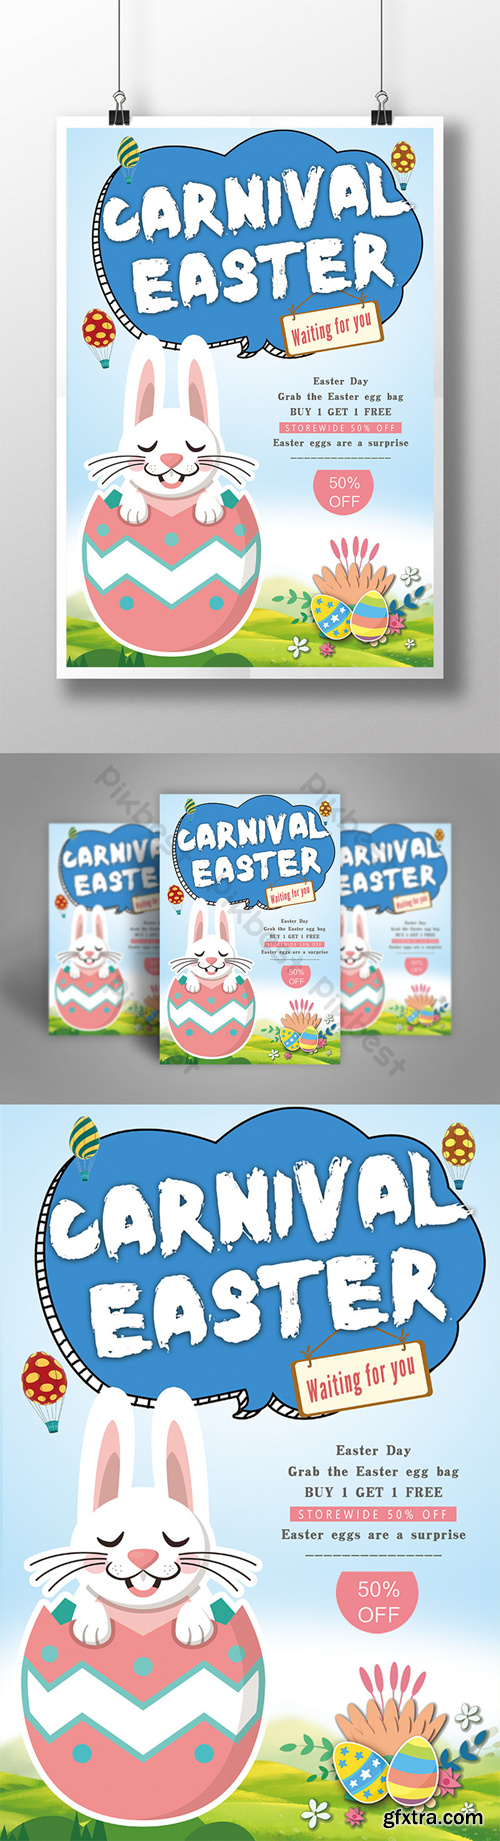 Creative cartoon poster for Easter promotion Template PSD